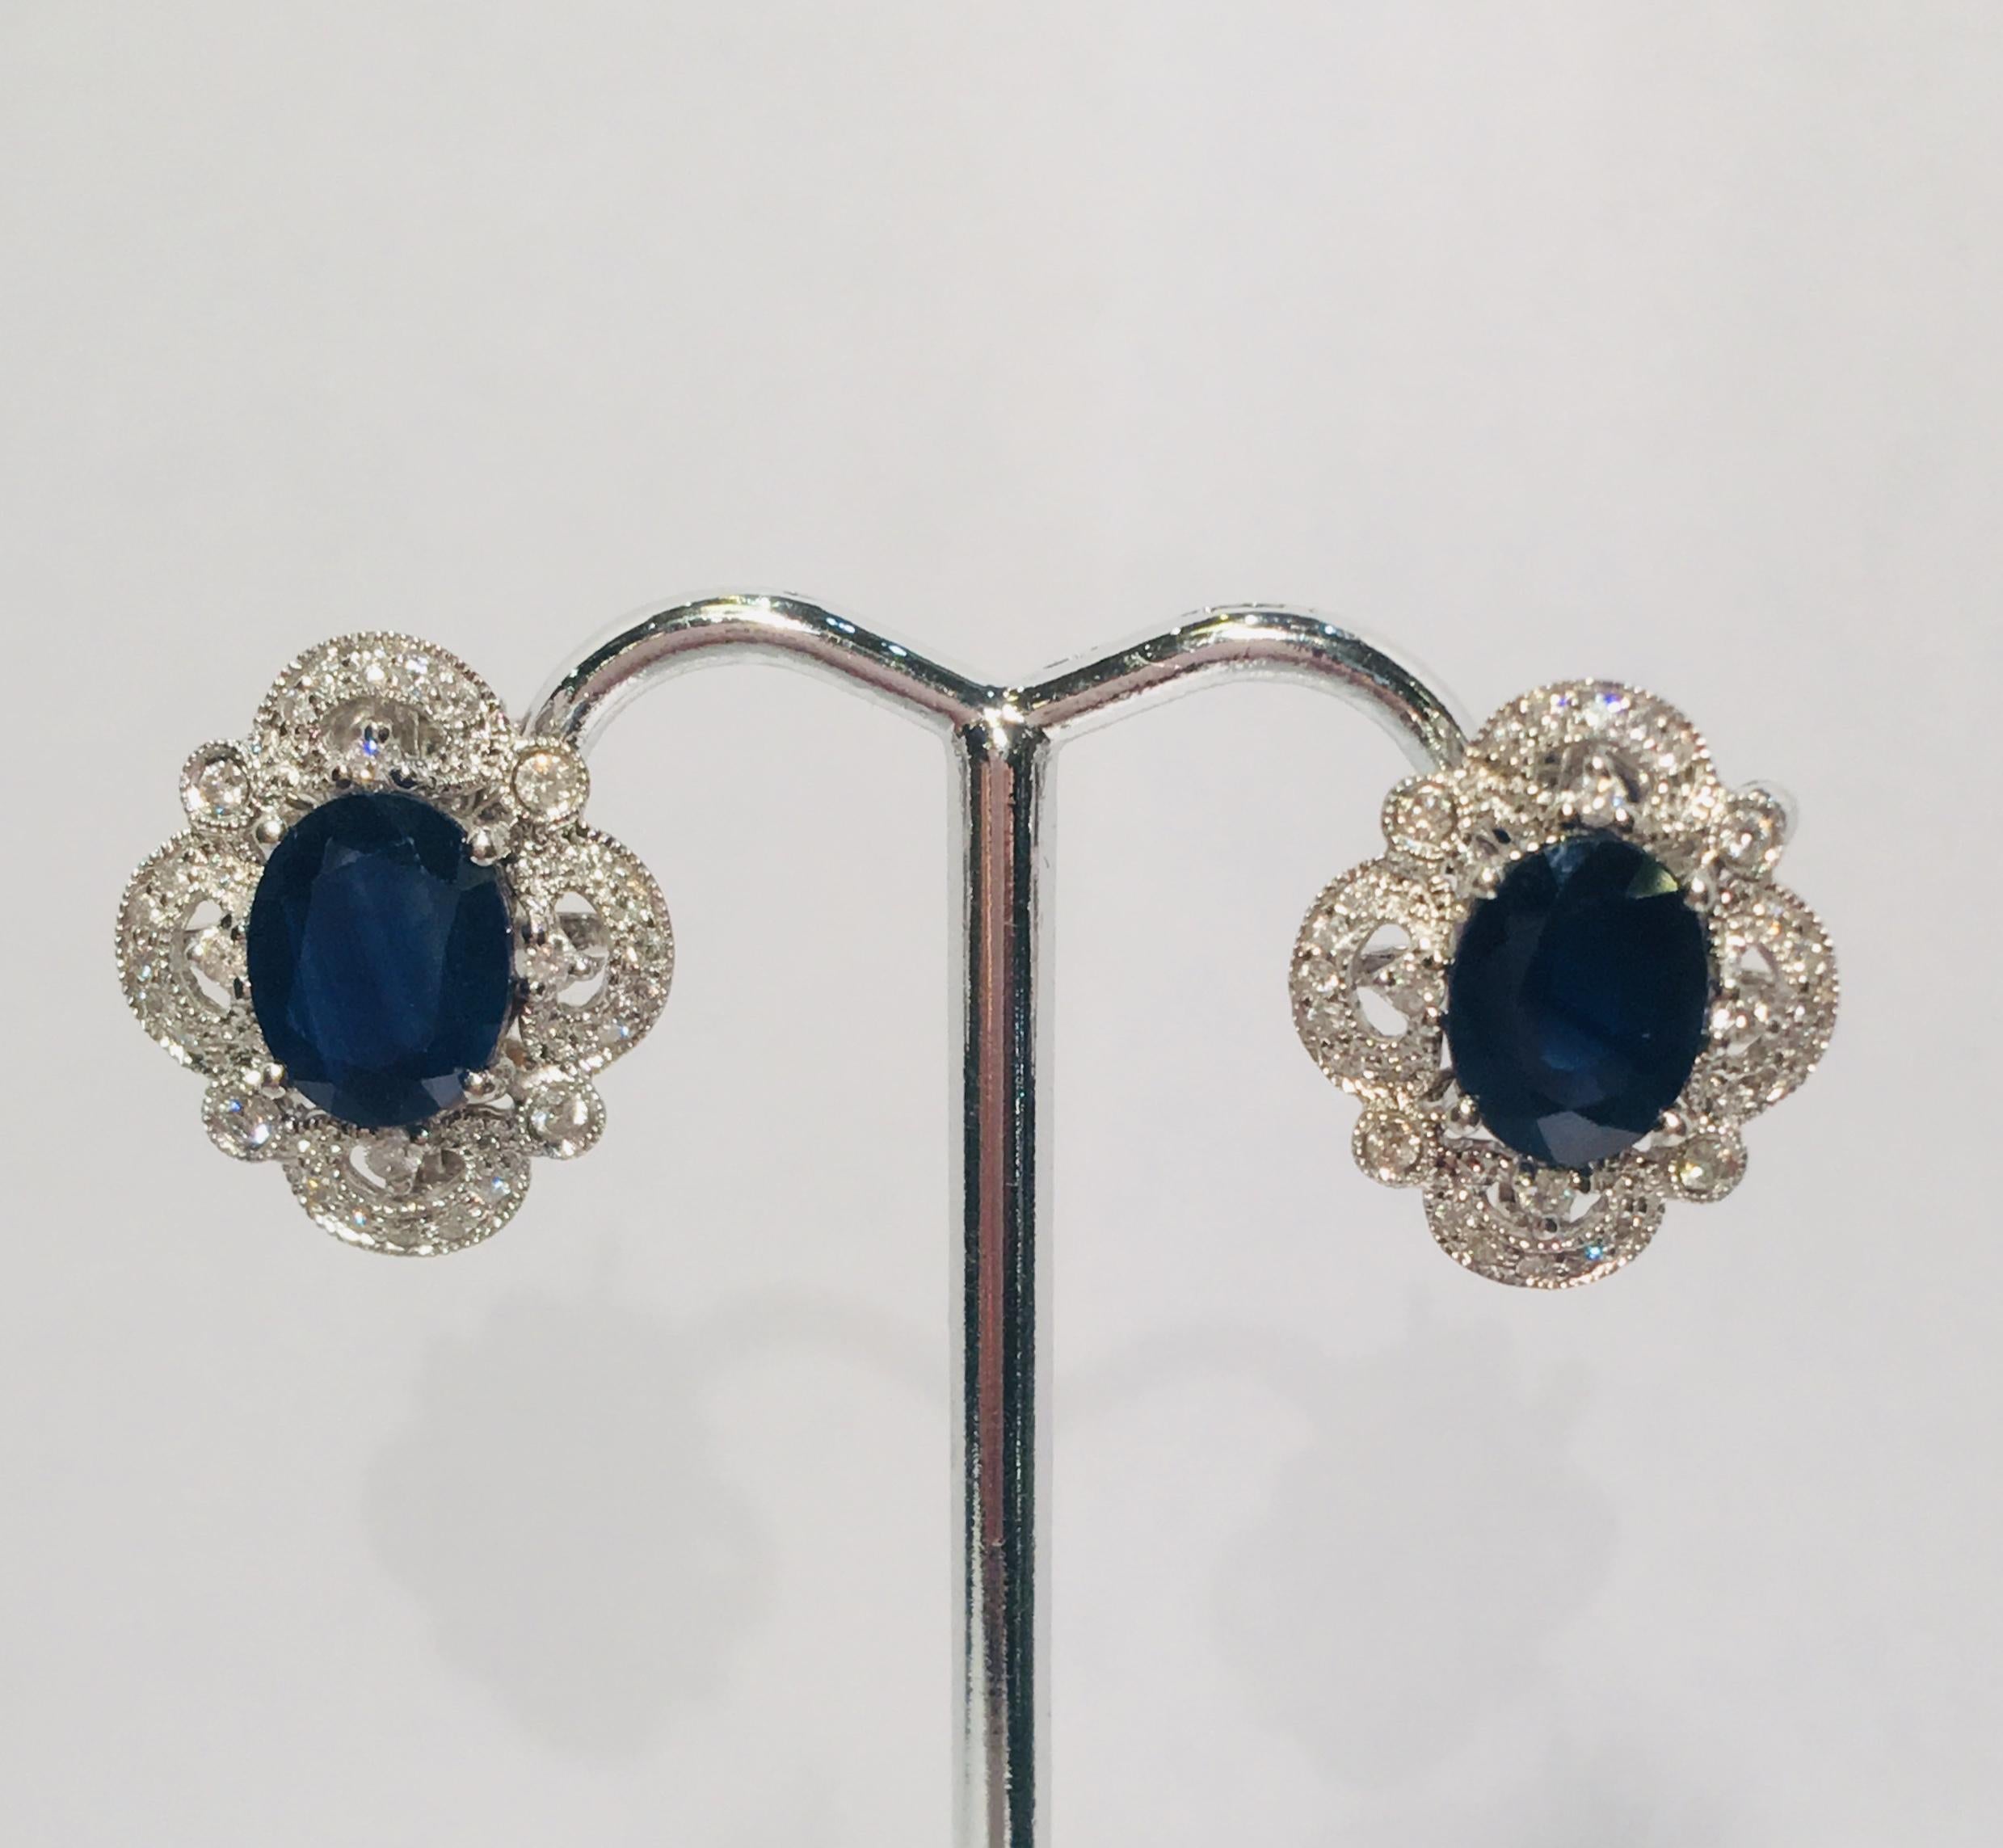 Elegant 14 karat white gold post earrings for pierced ears from noted Beverly Hills jeweler, Michael Christoff, feature a prong set, oval cut, dark blue sapphire surrounded by a sparkling filigree halo of bezel, prong and pave set diamonds, giving